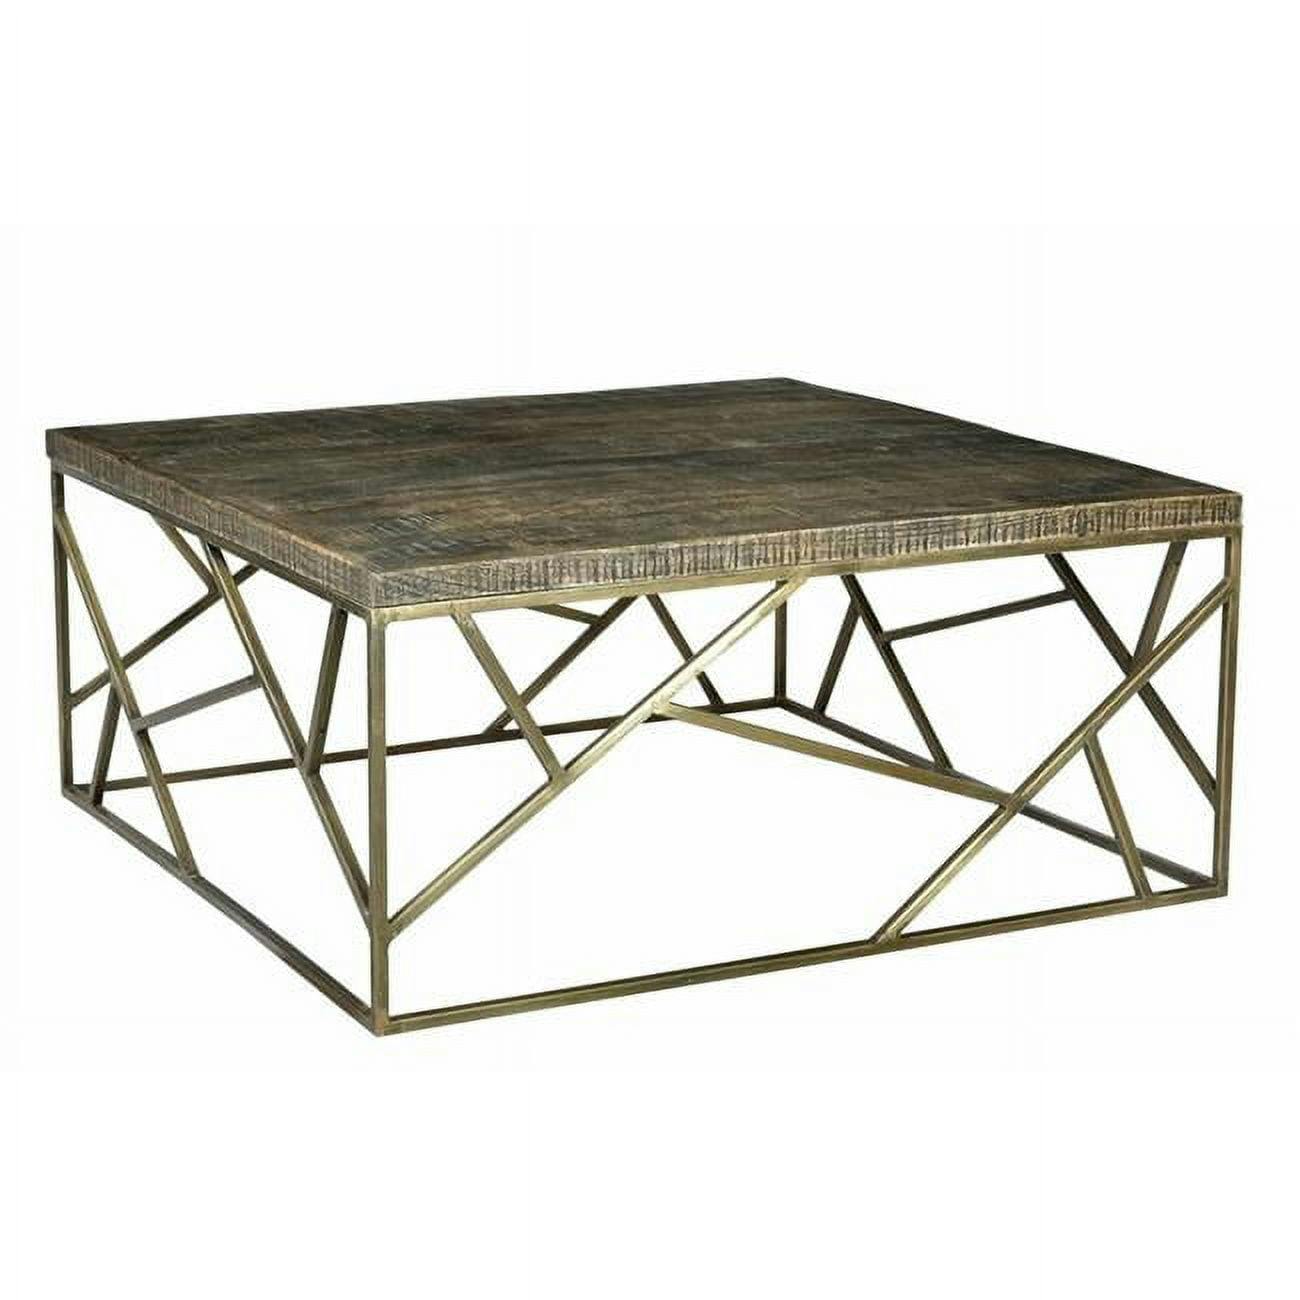 Bengal Manor 40" Square Mango Wood Coffee Table with Gold Iron Base